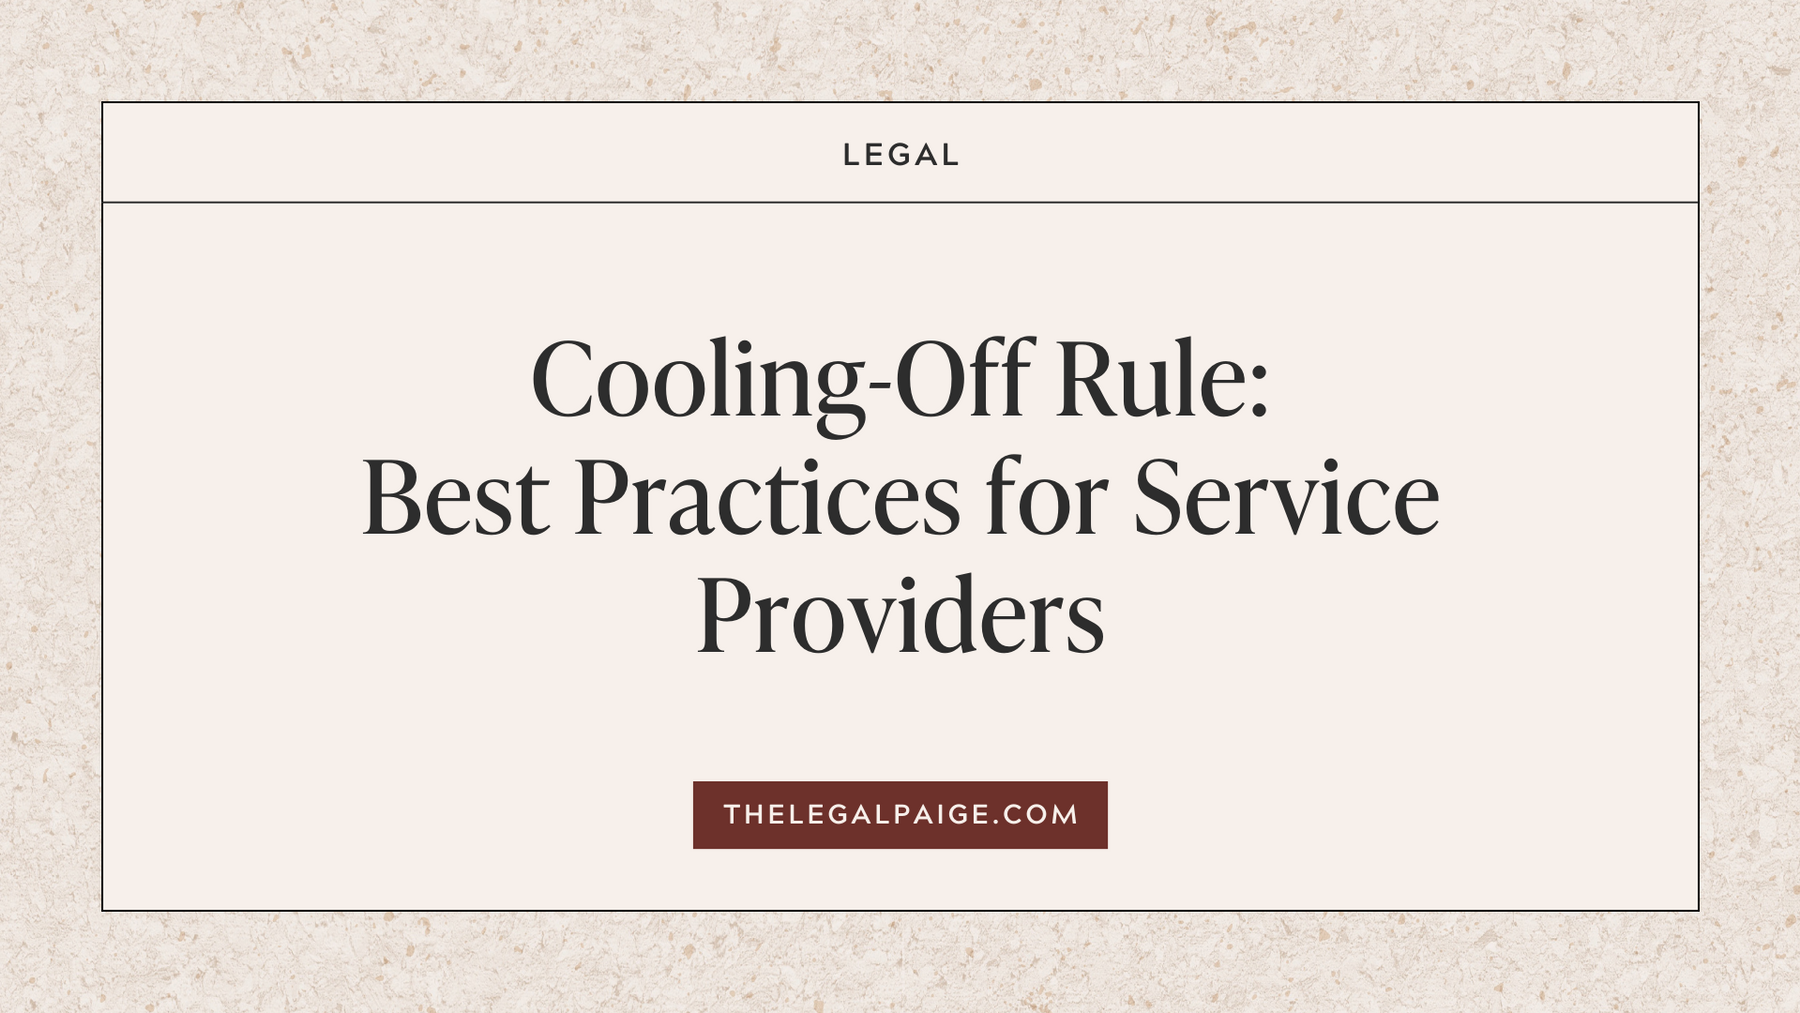 Cooling-Off Rule: Best Practices for Service Providers